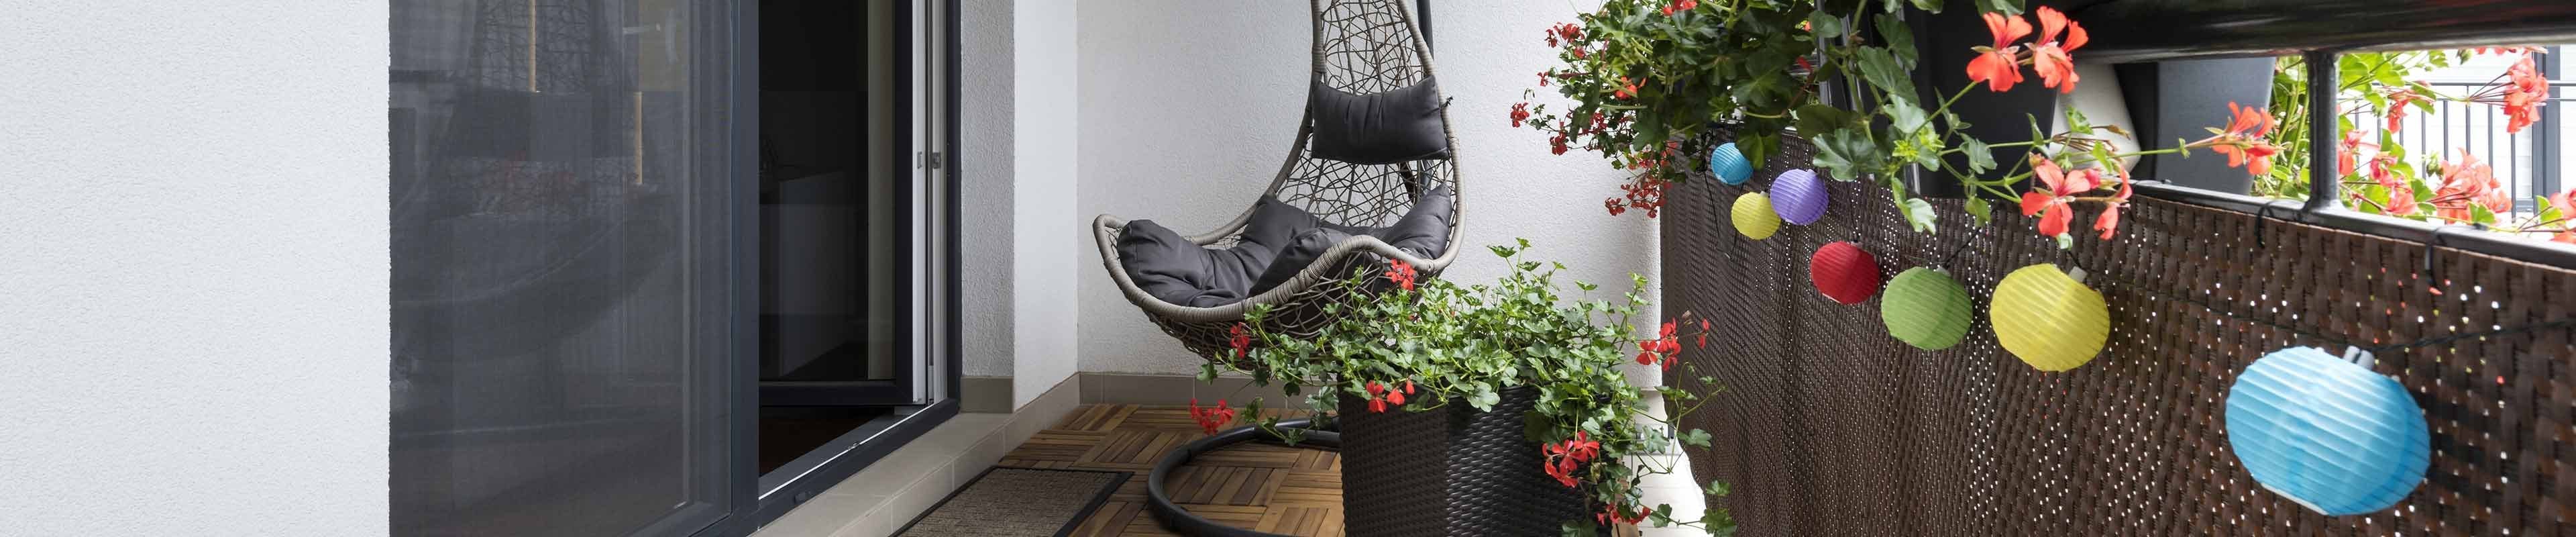 An apartment balcony decorated with plants and other colorful items.